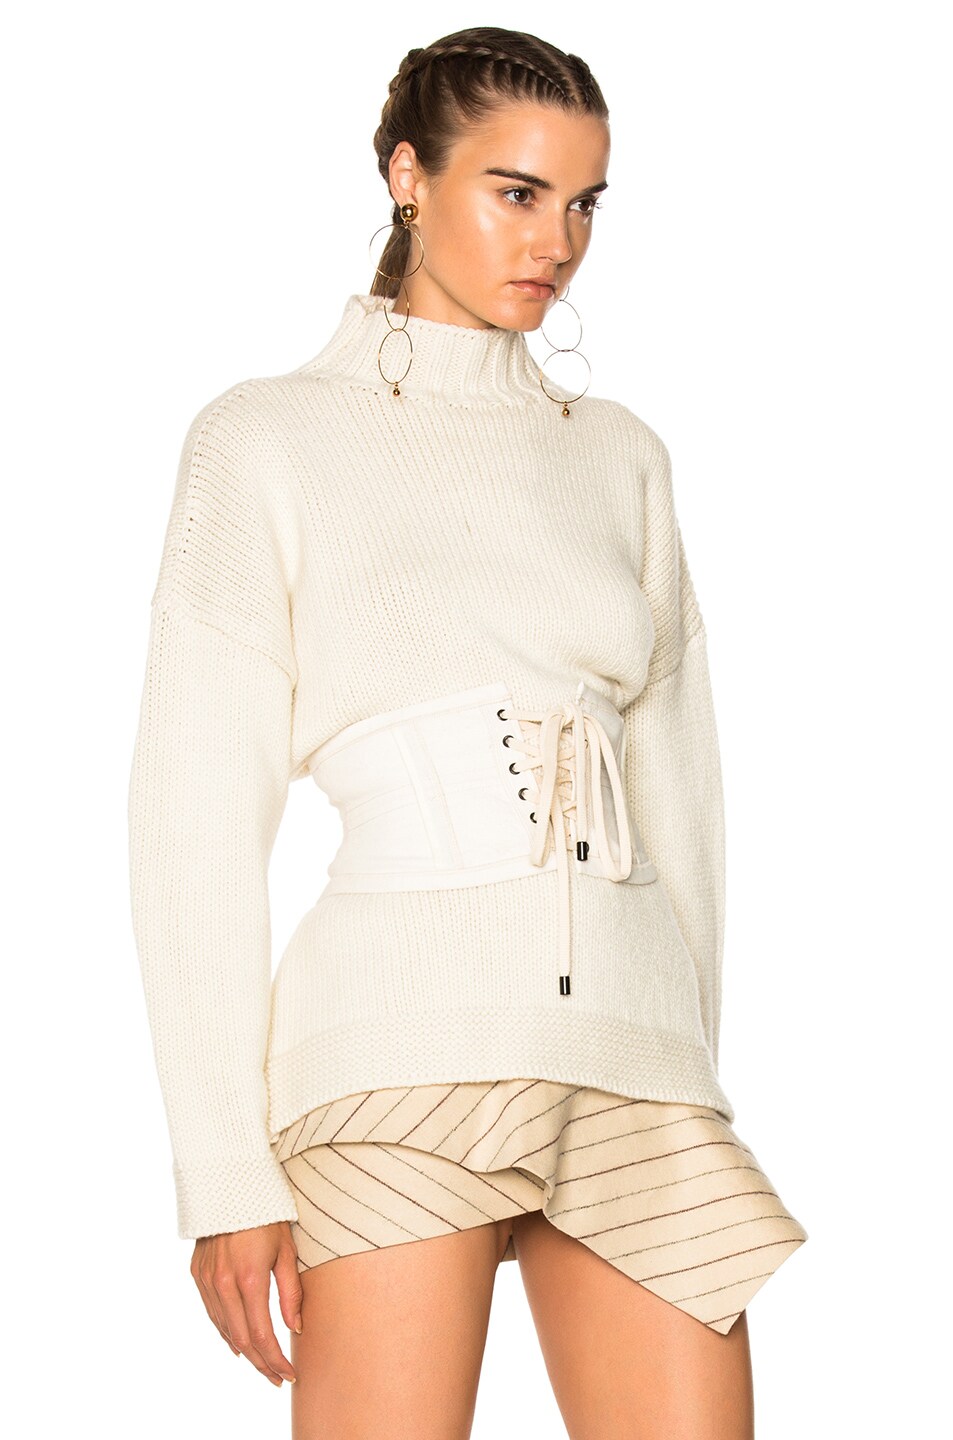 Alexander McQueen Chunky Knit High Neck Sweater in Ivory | FWRD